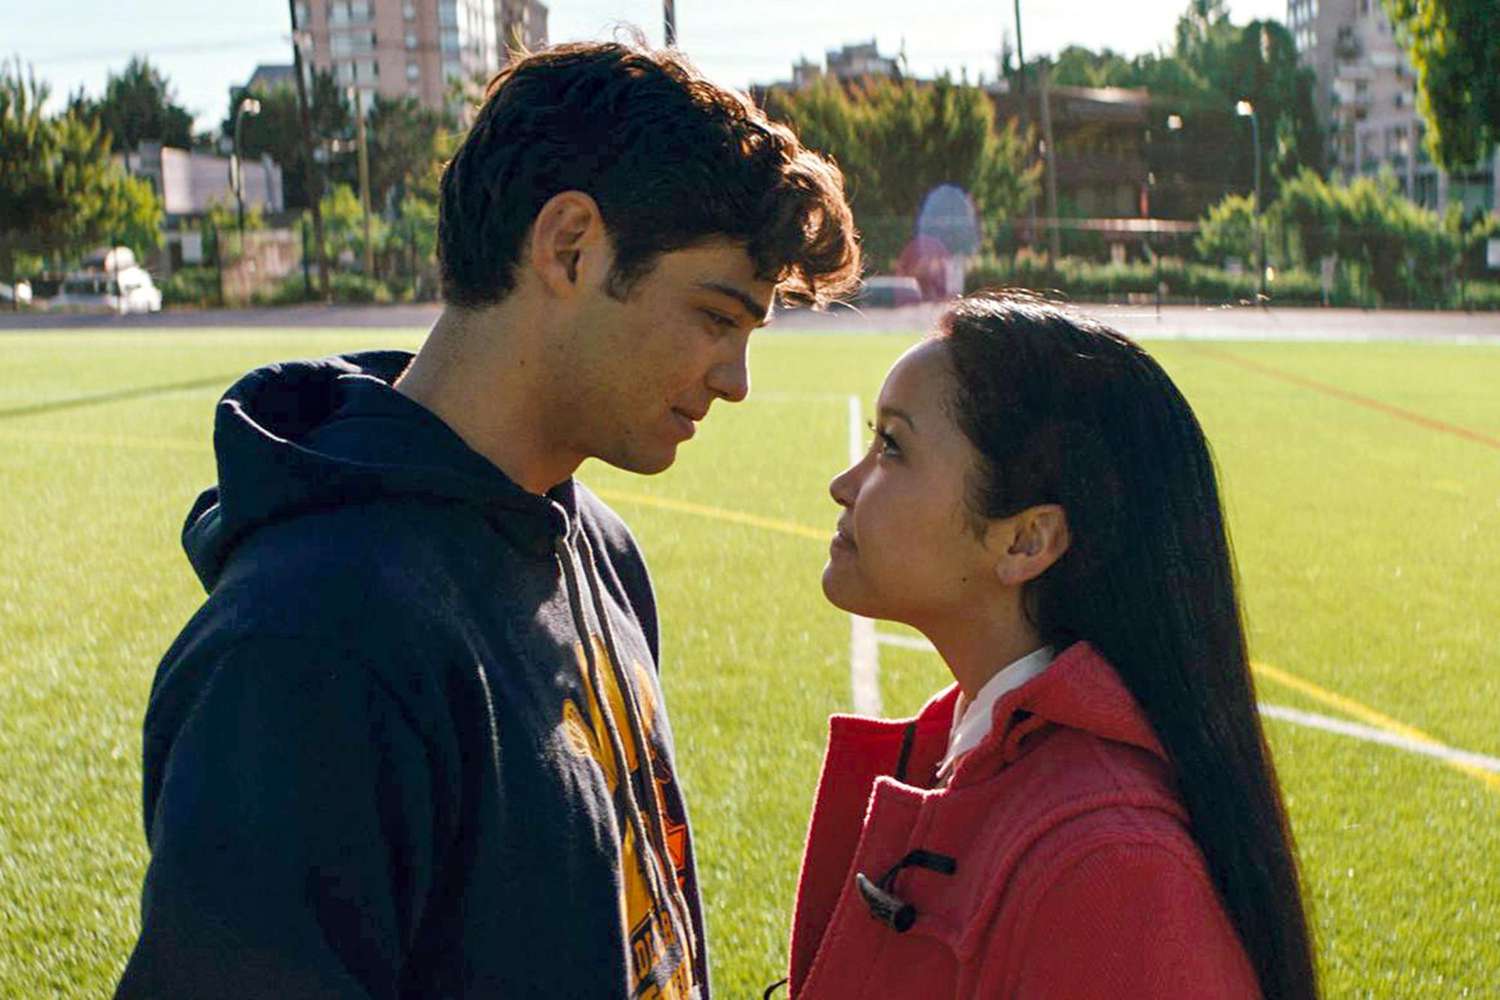 Johnson, Susan. To all the Boys I've Loved Before. 2018. Lara Jean and Peter looking at each other romantically on the soccer field.